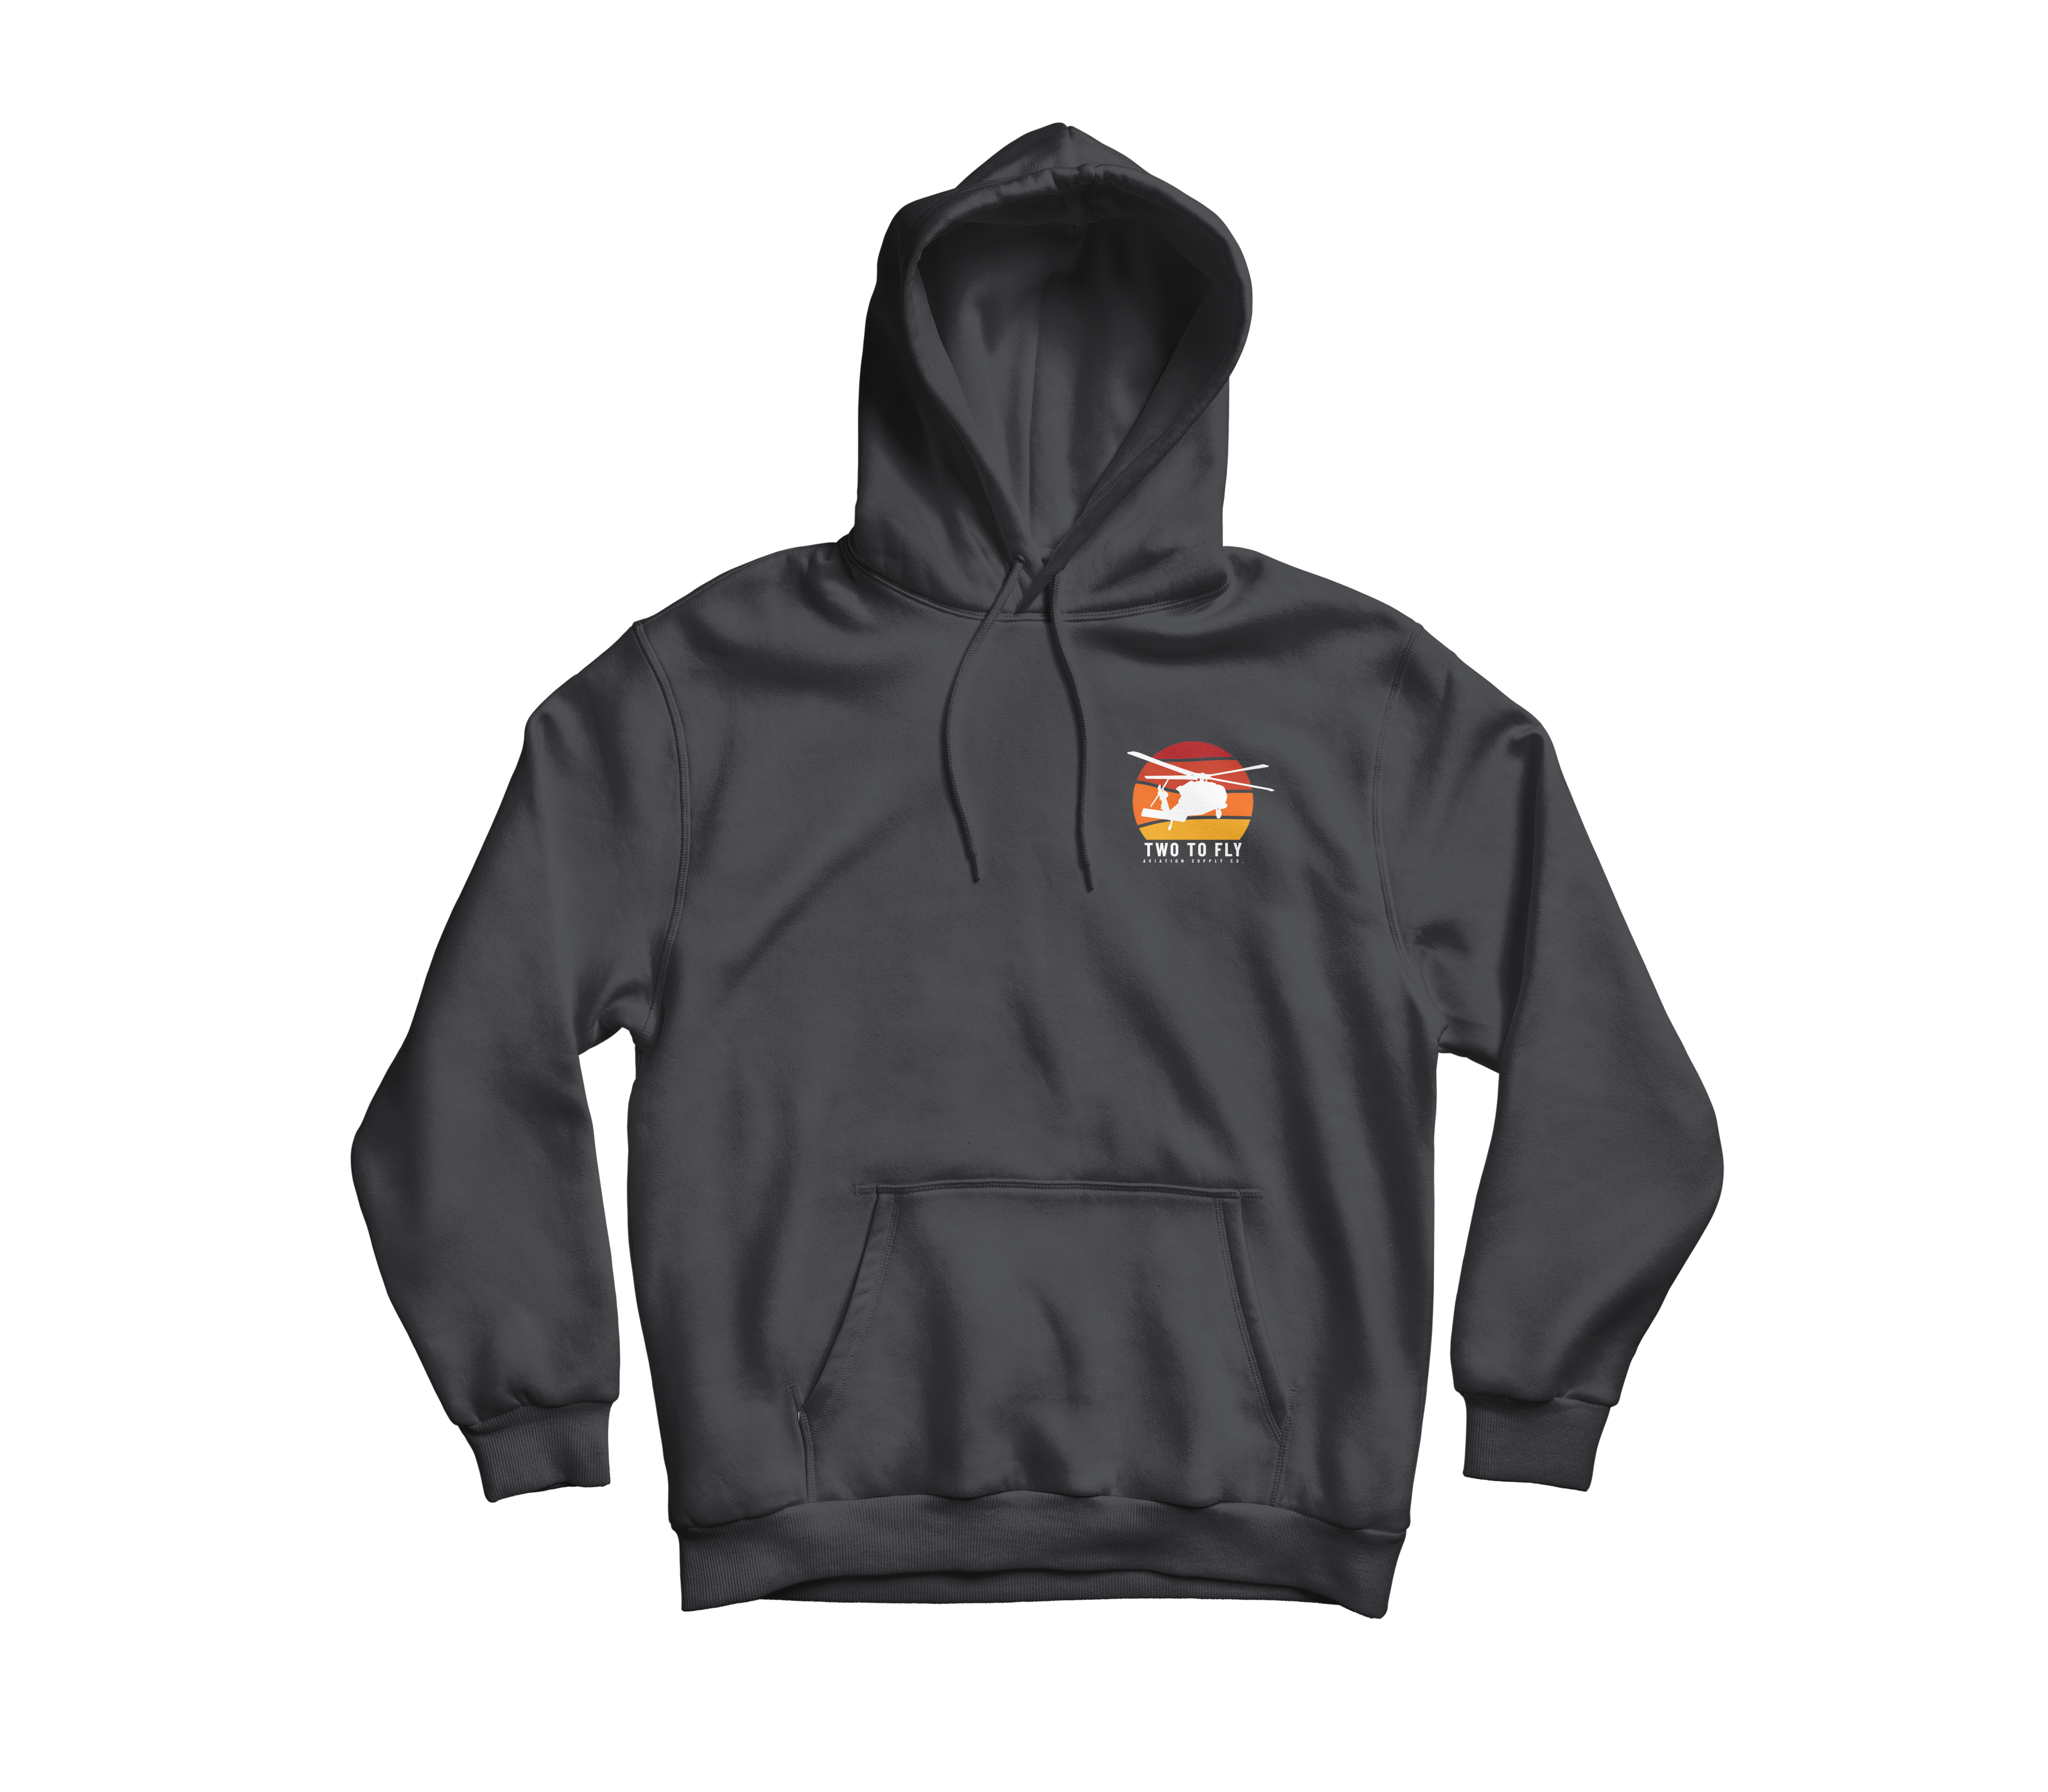 Sikorsky Fire Service Pullover Hoodie